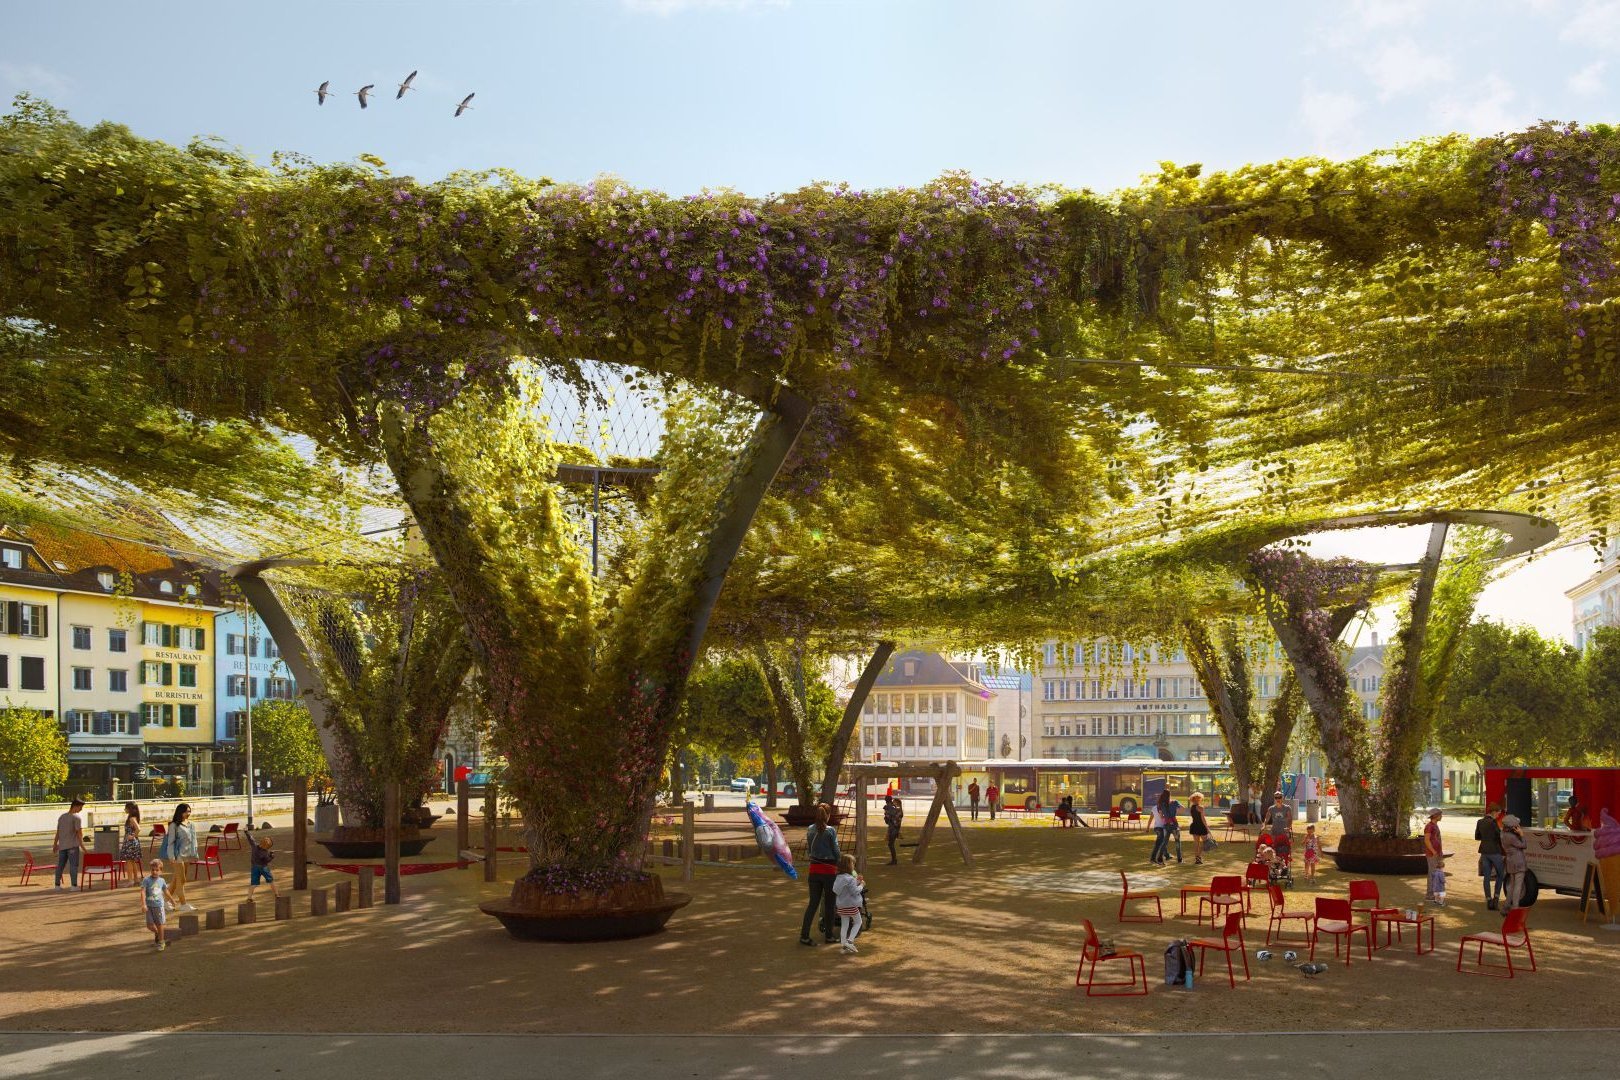 Visualisation of a possible greening on the Roter Platz in Solothurn